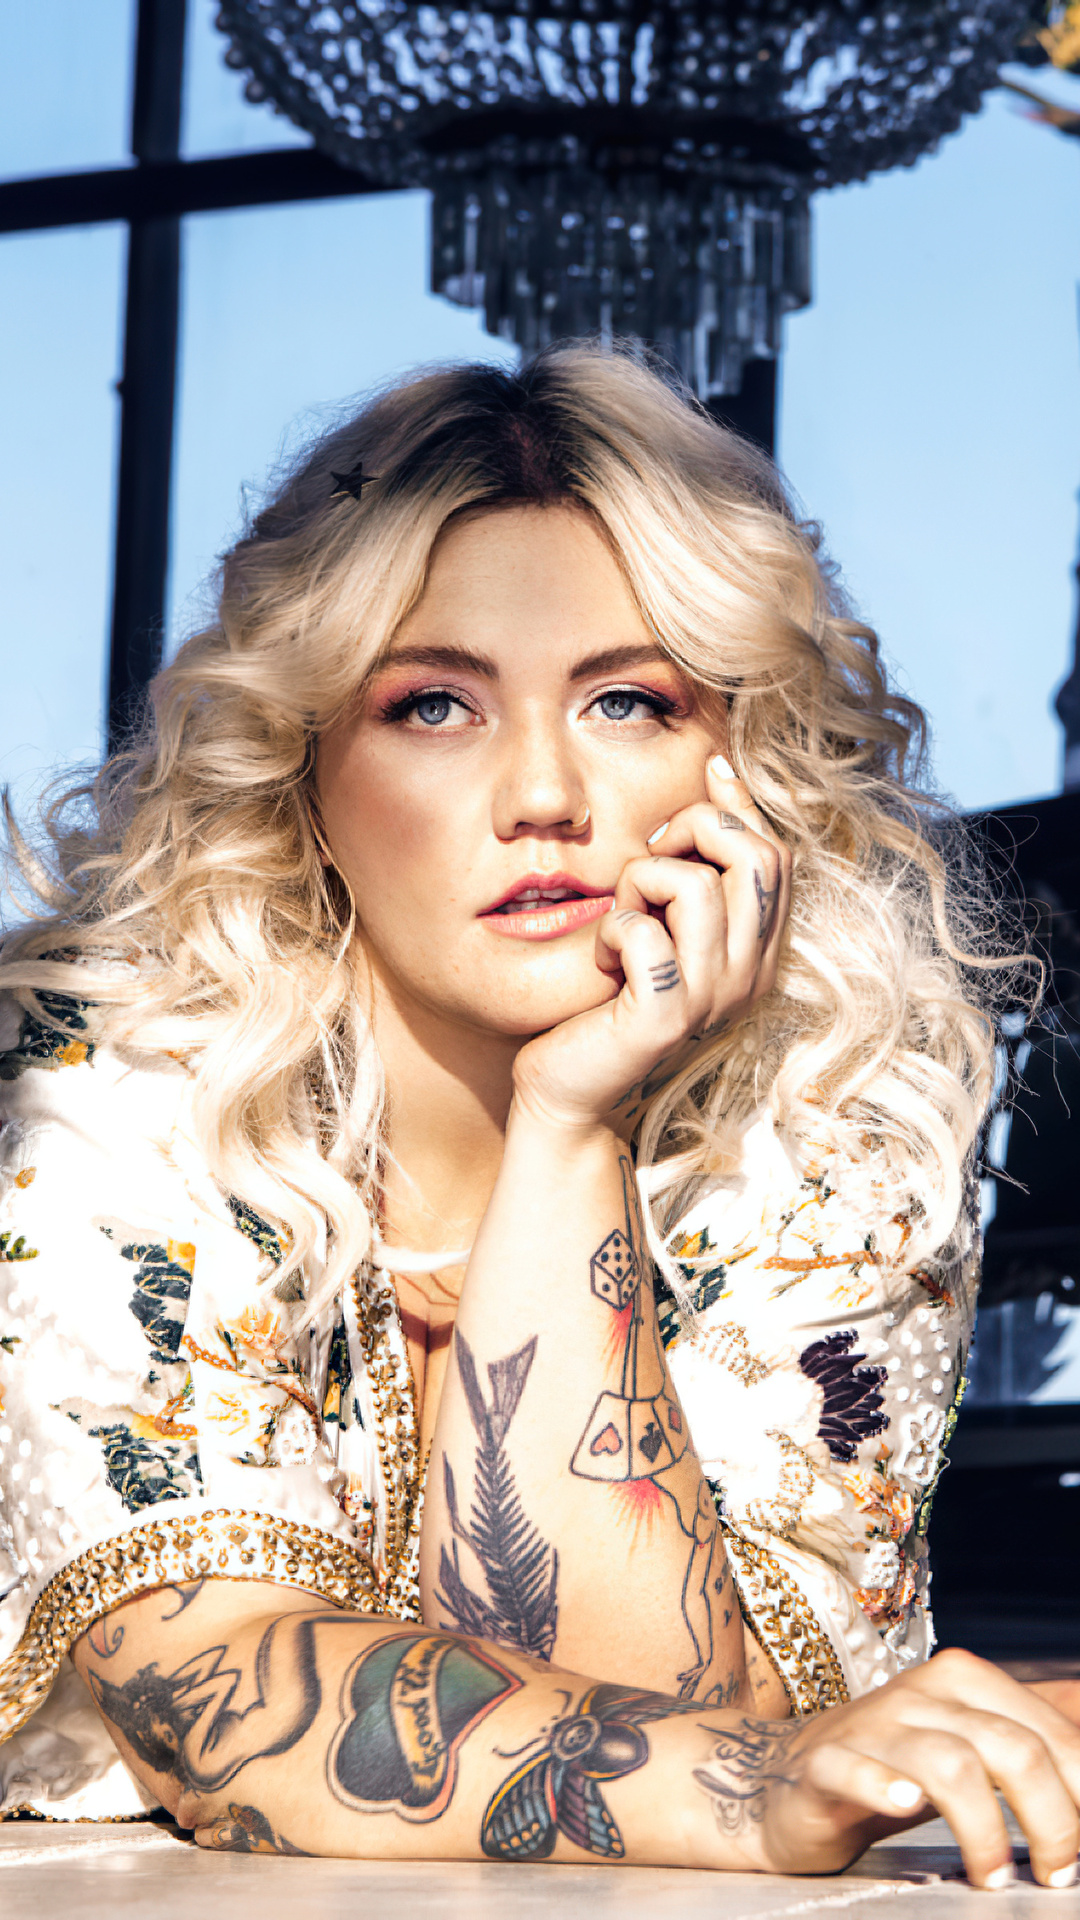 Elle King 2020 iPhone 6s, 6 Plus, Pixel xl , One Plus 3t, 5 HD 4k Wallpaper, Image, Background, Photo and Picture